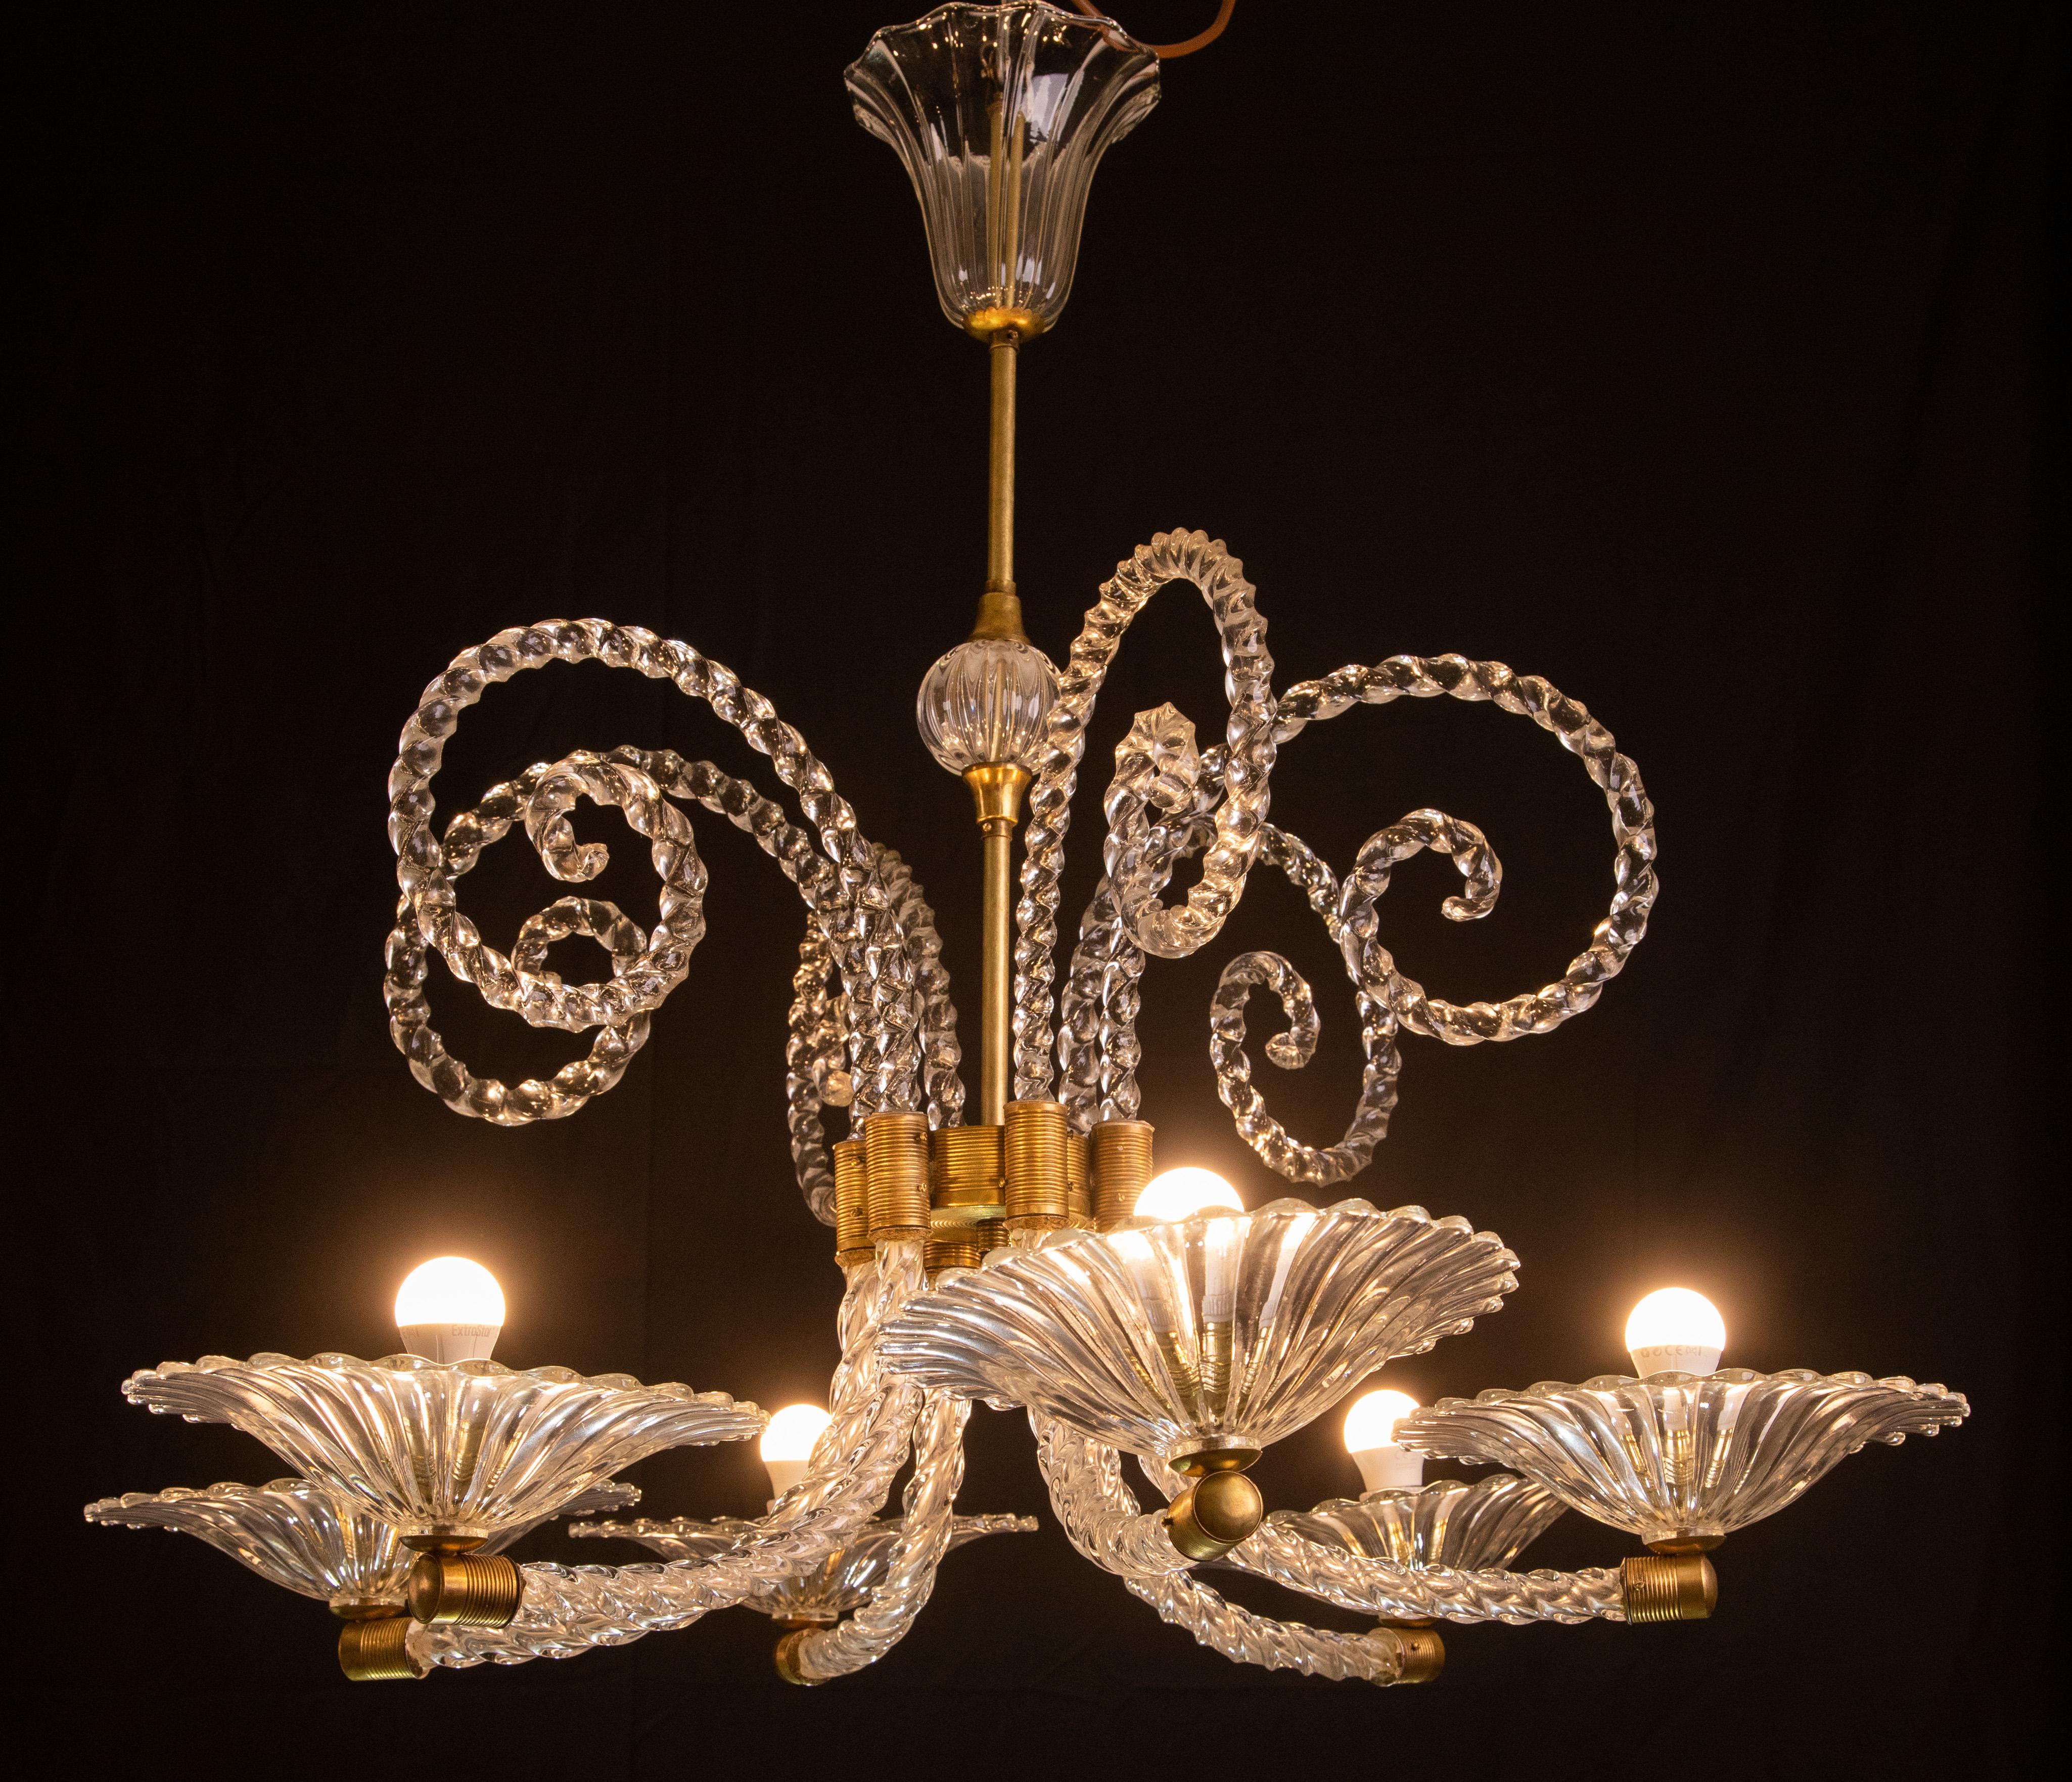 Extraordinary Murano chandelier from the Barovier and Toso glassworks.

Period circa 1940.

The chandelier consists of a central brass board, fully restored to a high gloss, to which 6 arms with cups are attached, for a total of 6 lights.

The